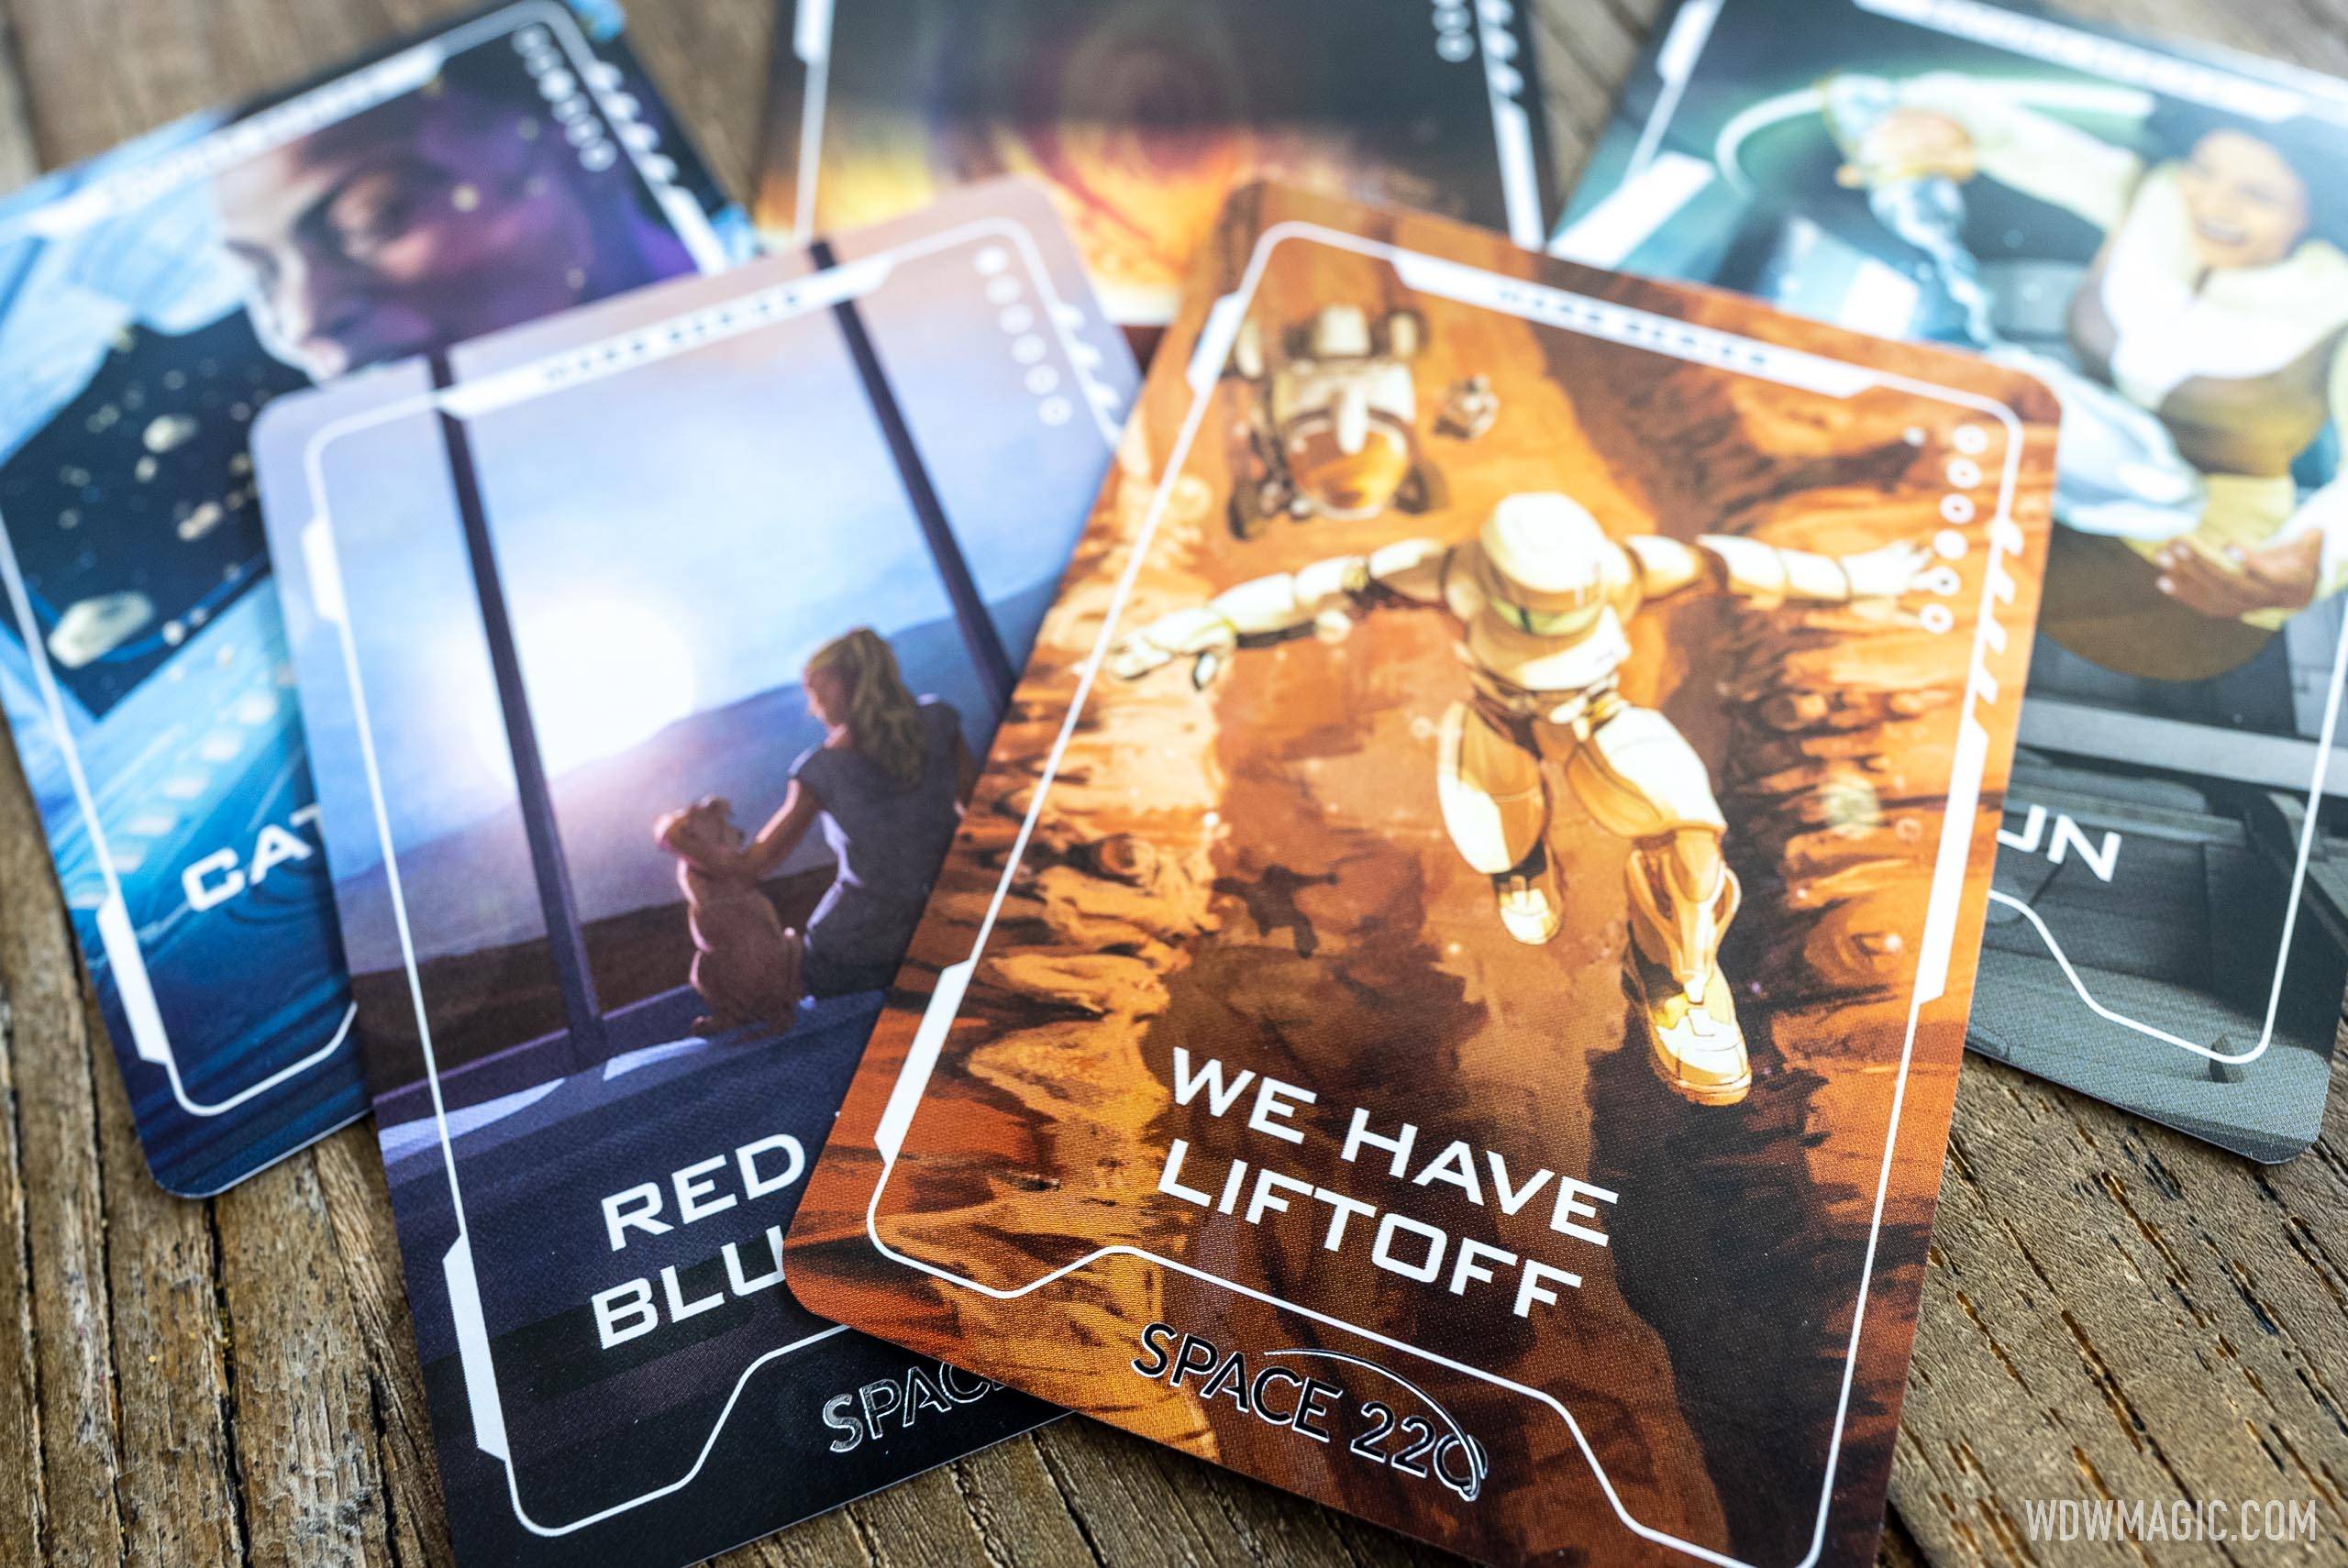 EPCOT's Space 220 Restaurant celebrates its first year with three new series of Space 220 Collectible Trading Cards